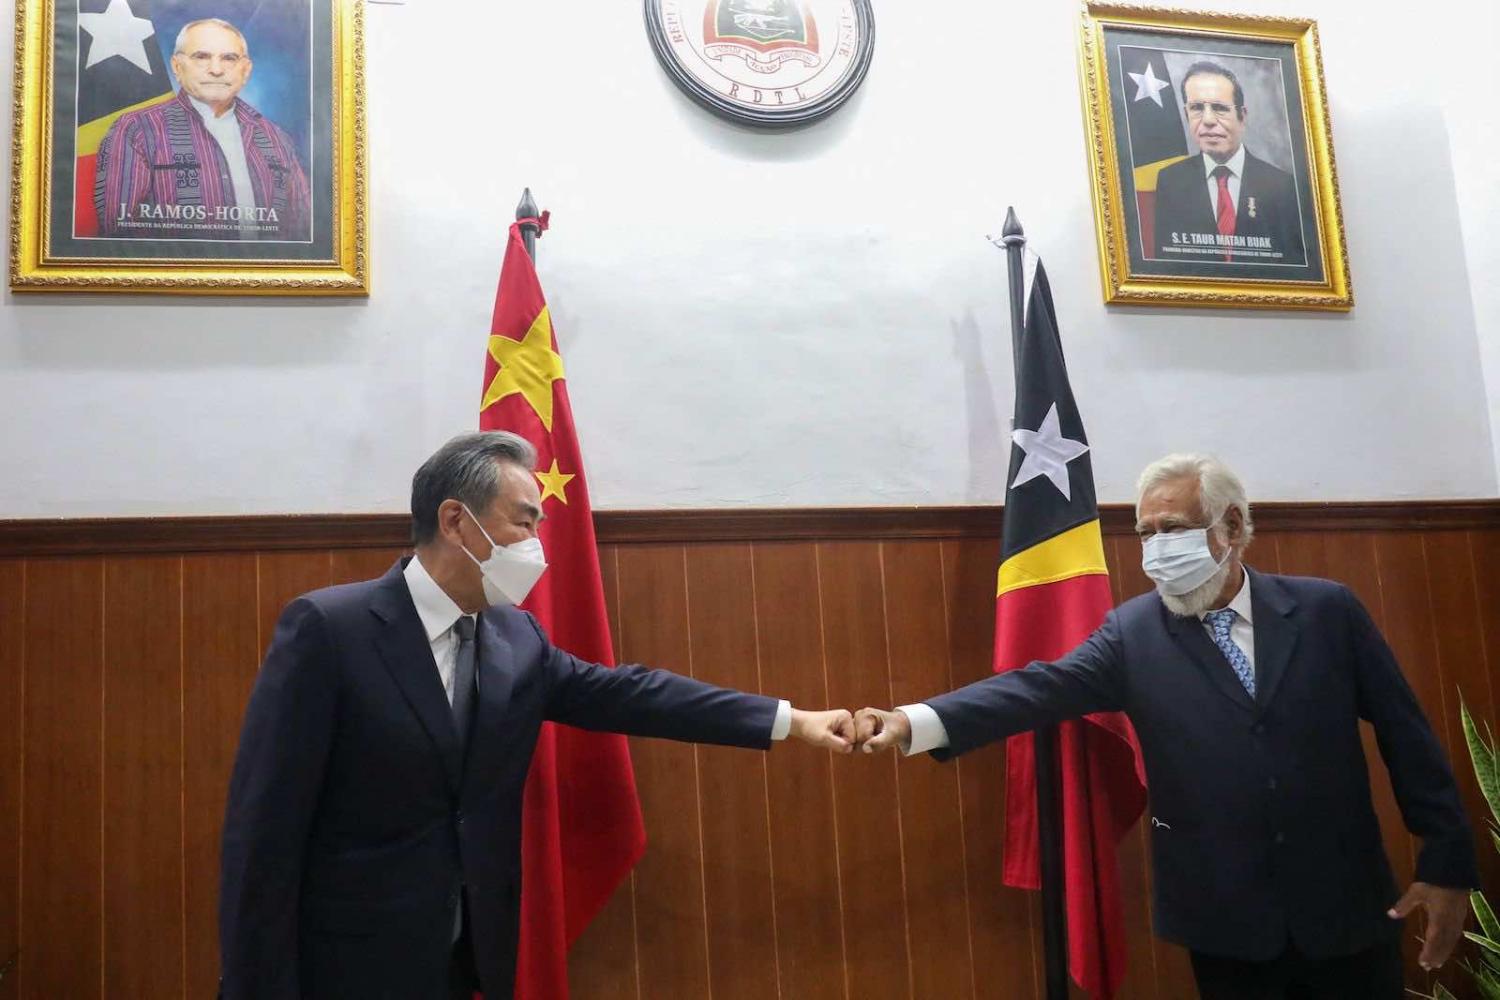 East Timor’s former leader Xanana Gusmao (right) greets China’s Foreign Minister Wang Yi during a meeting in Dili on 4 June (Valentino Dariel Sousa/AFP via Getty Images)